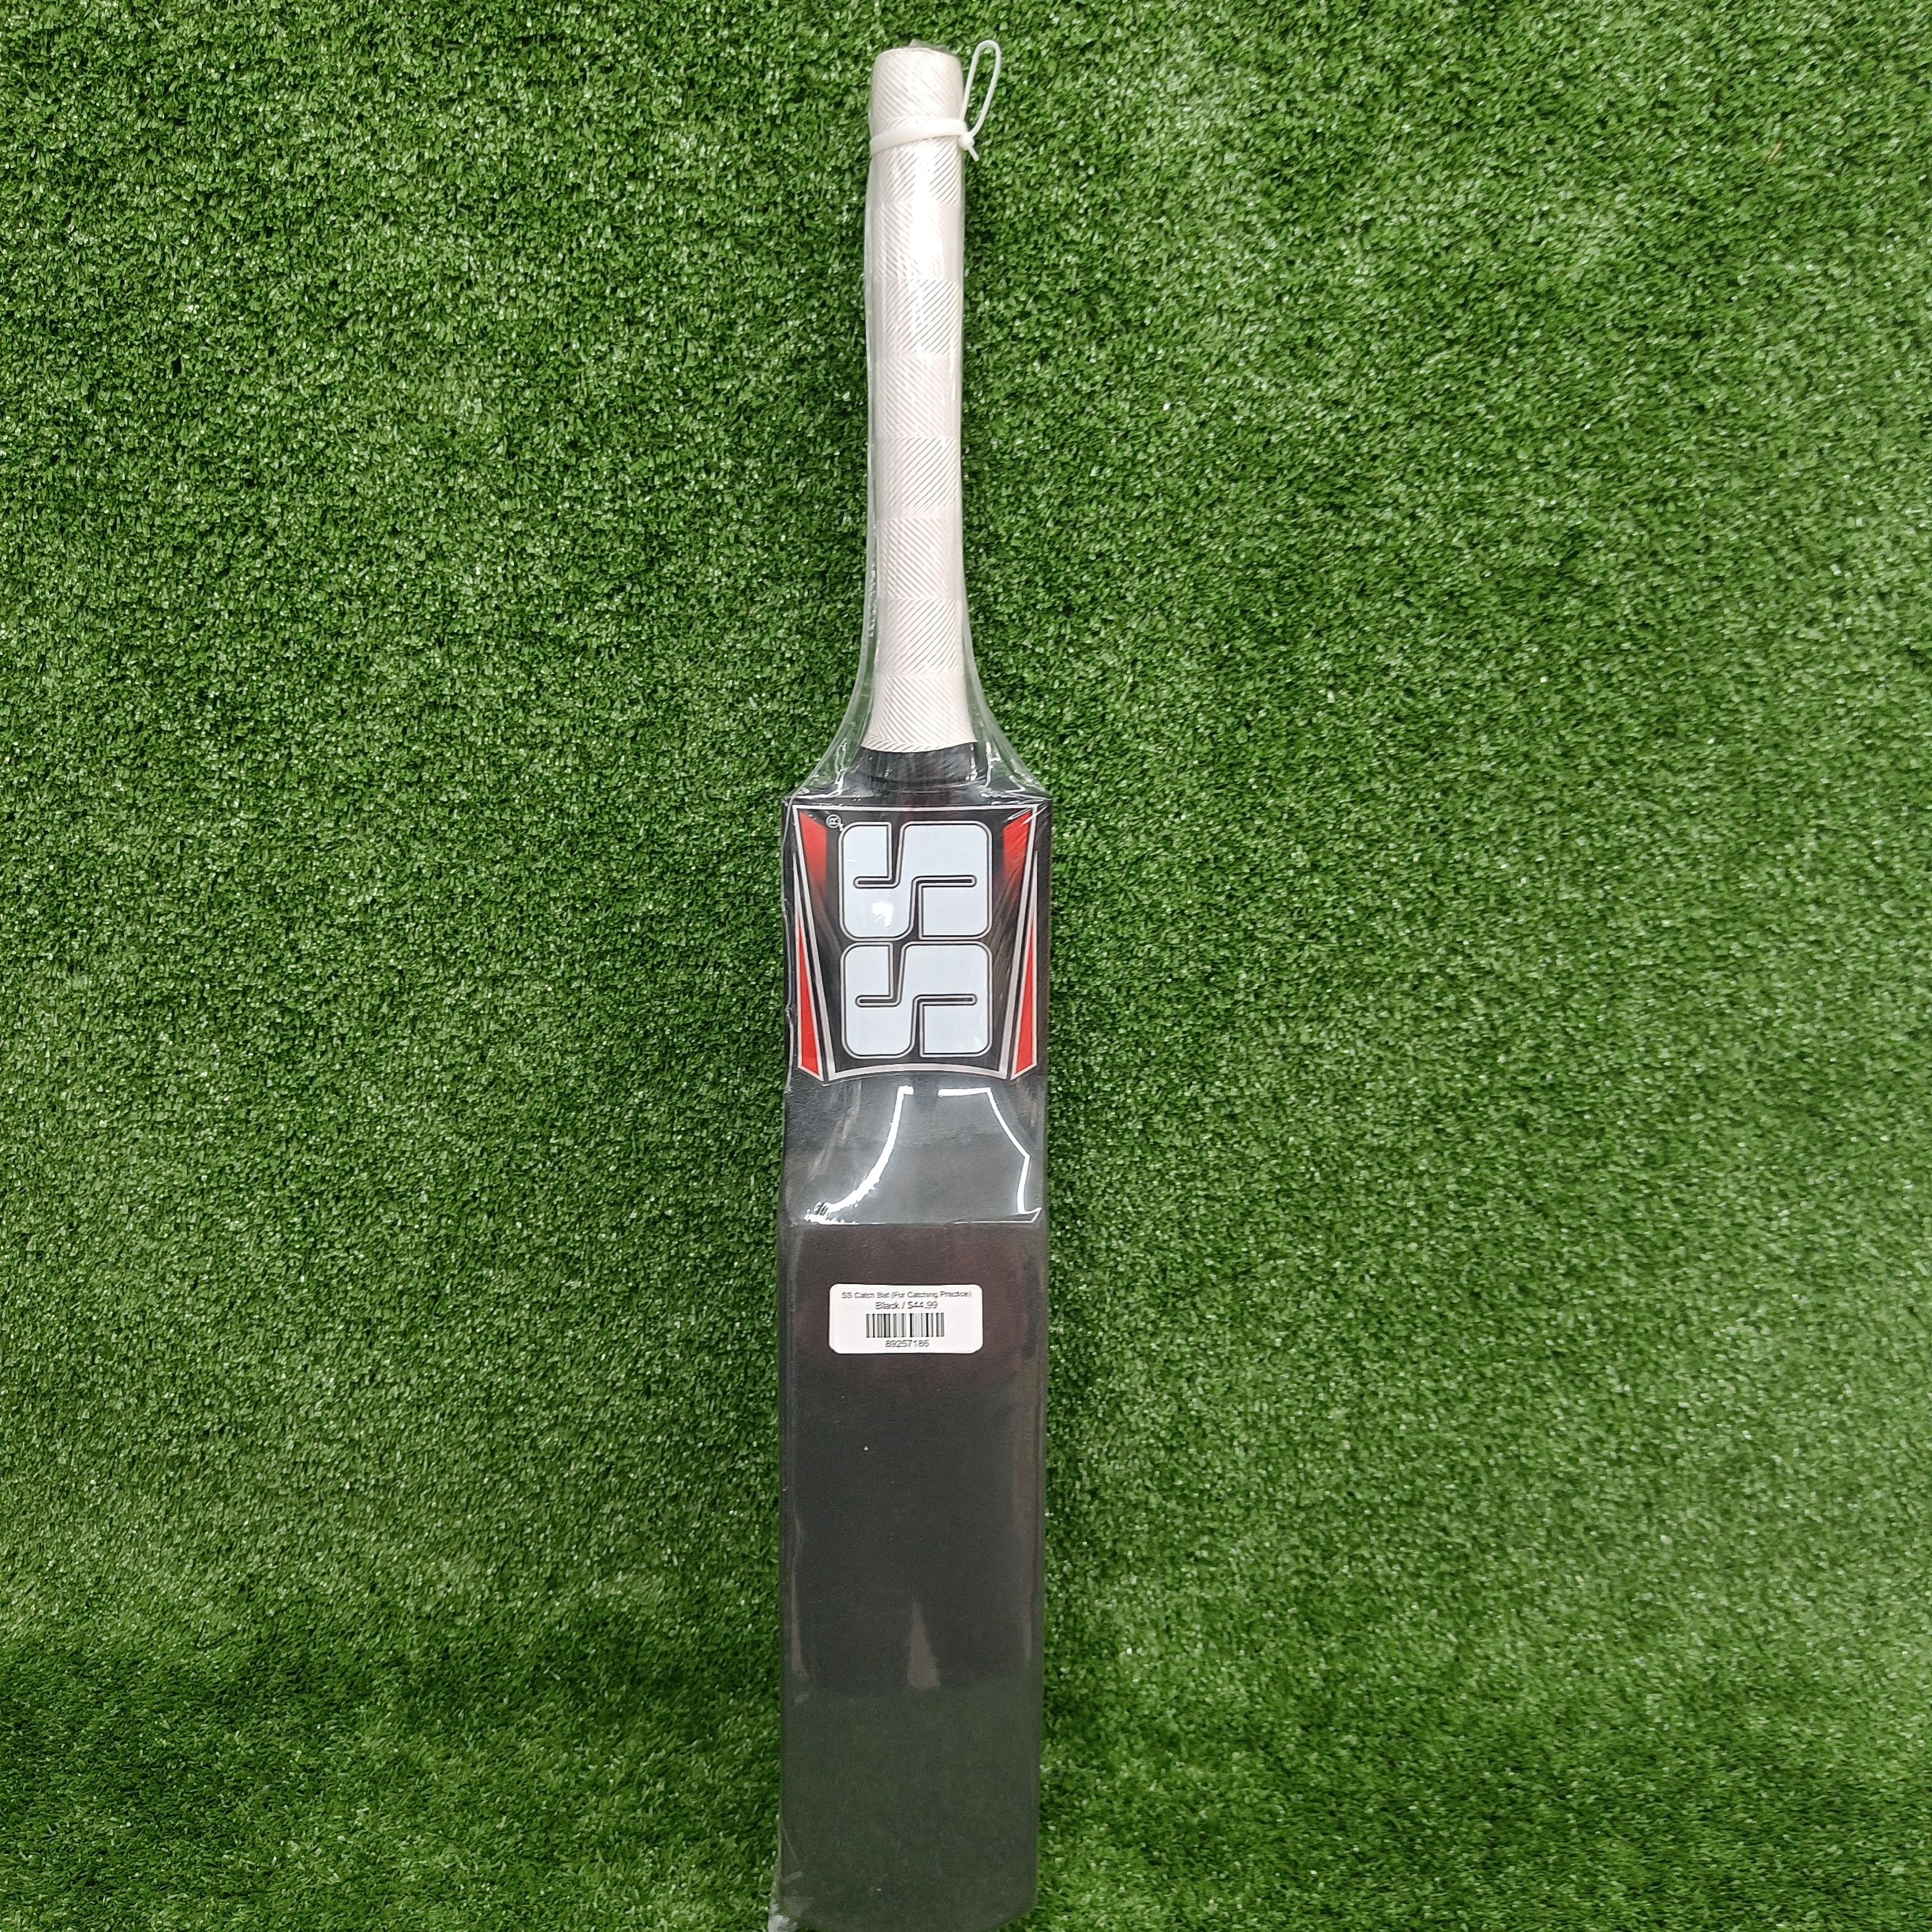 SS R - 7 Catch Bat (For Catching Practice)